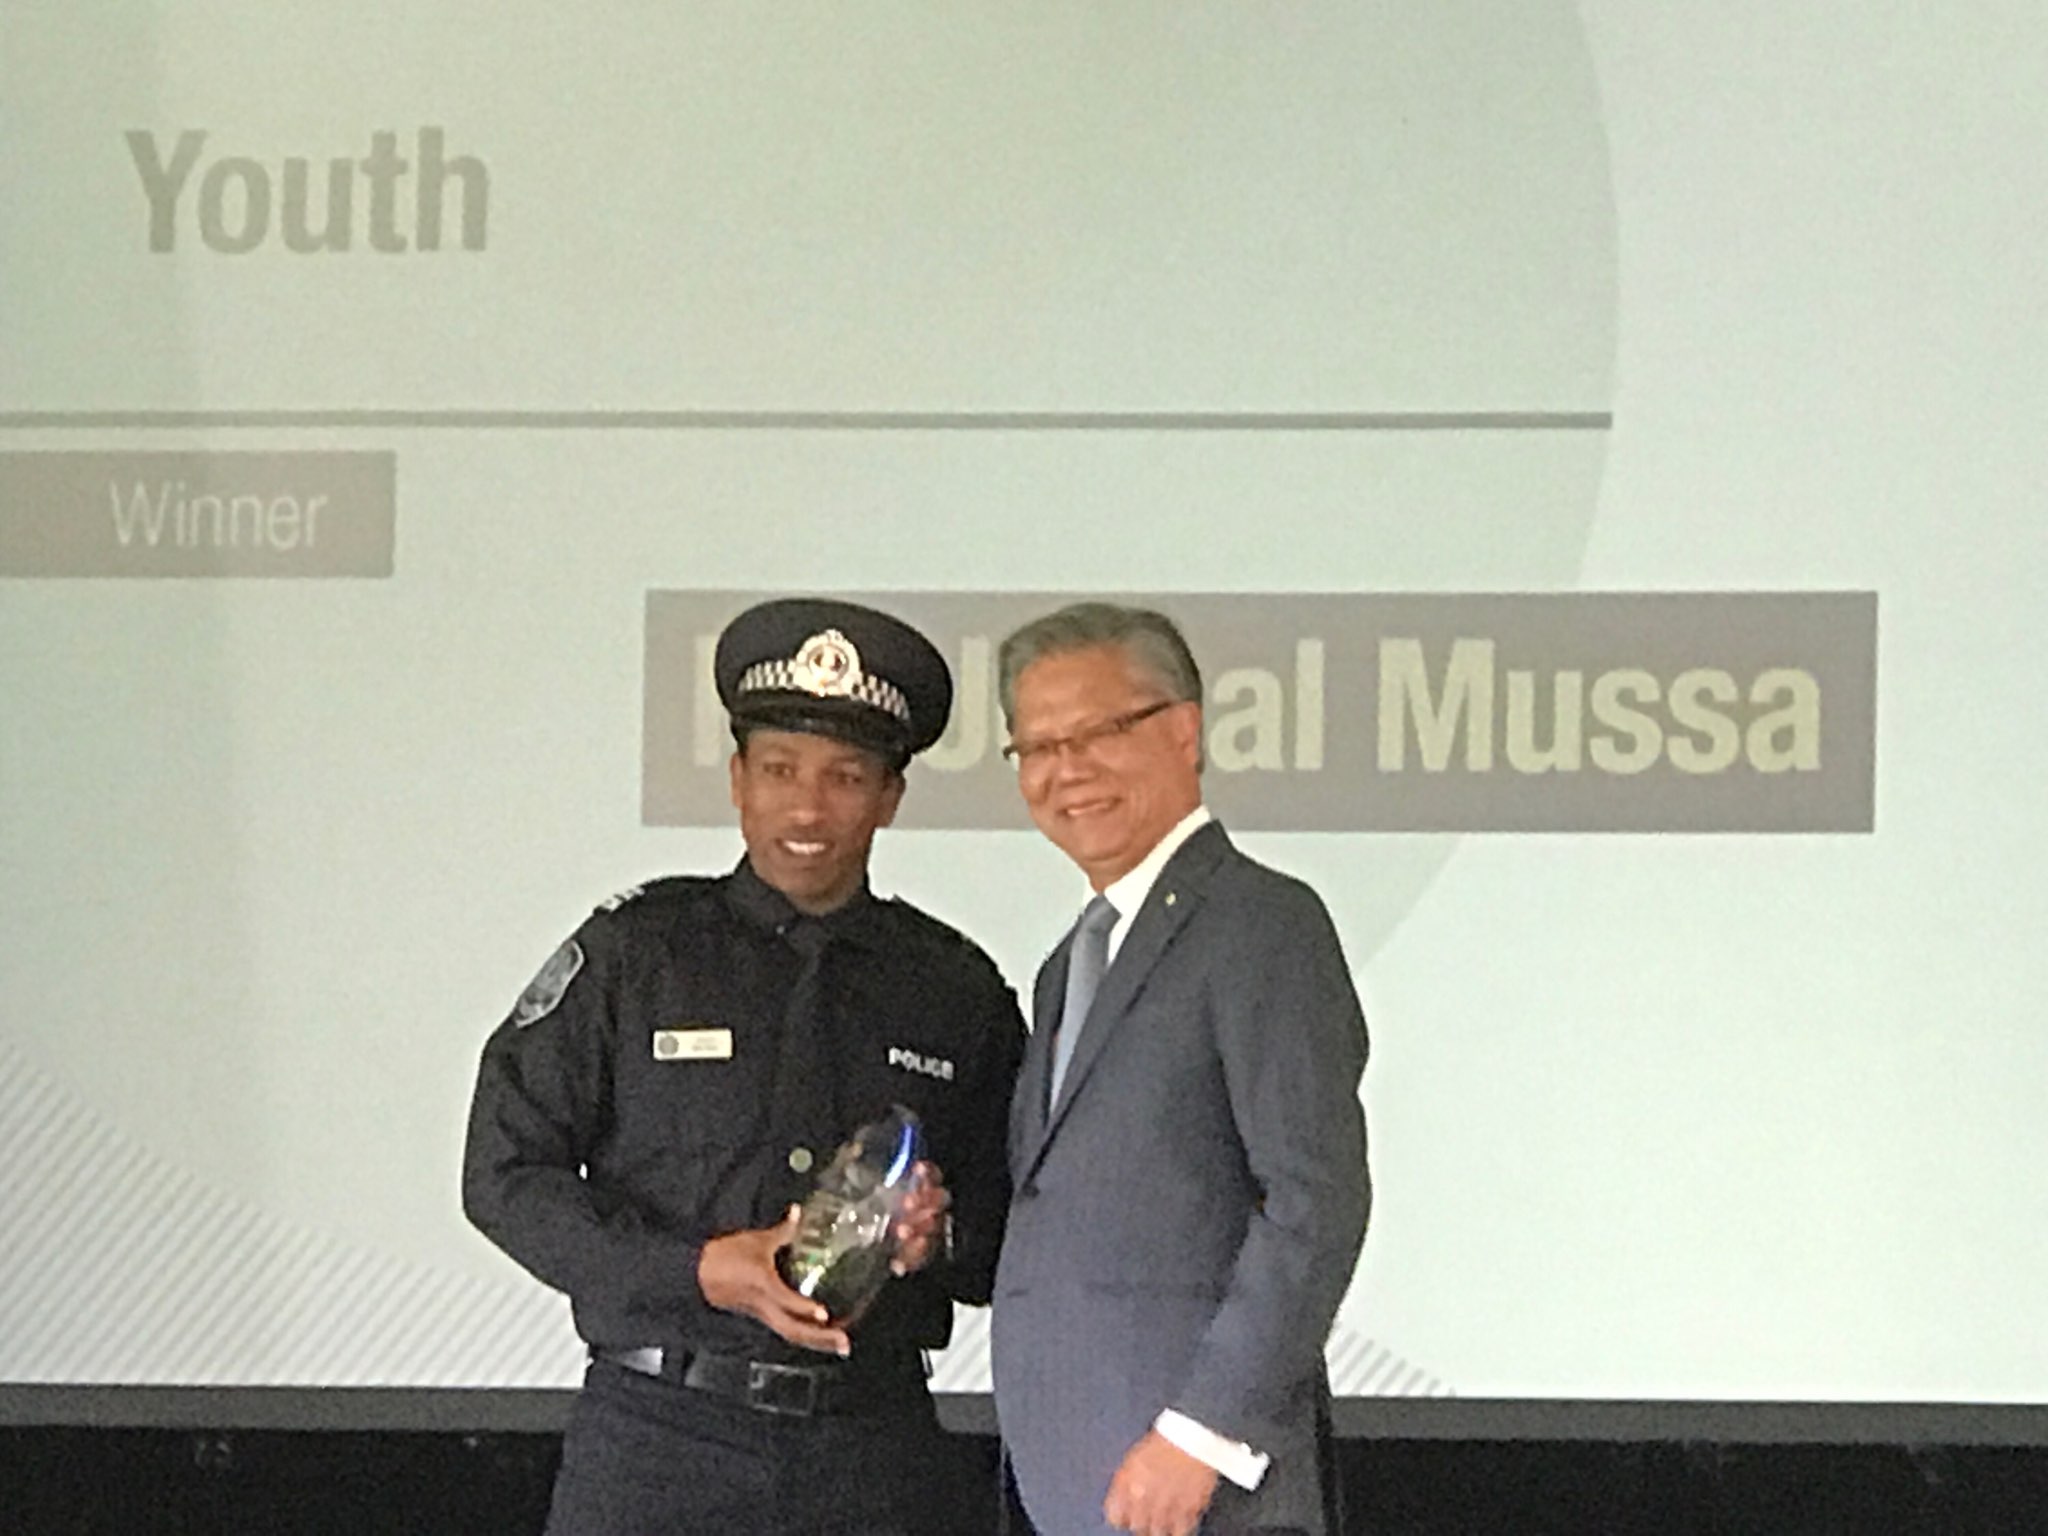 Community Constable Mussa receives his Multicultural Award from the Governor